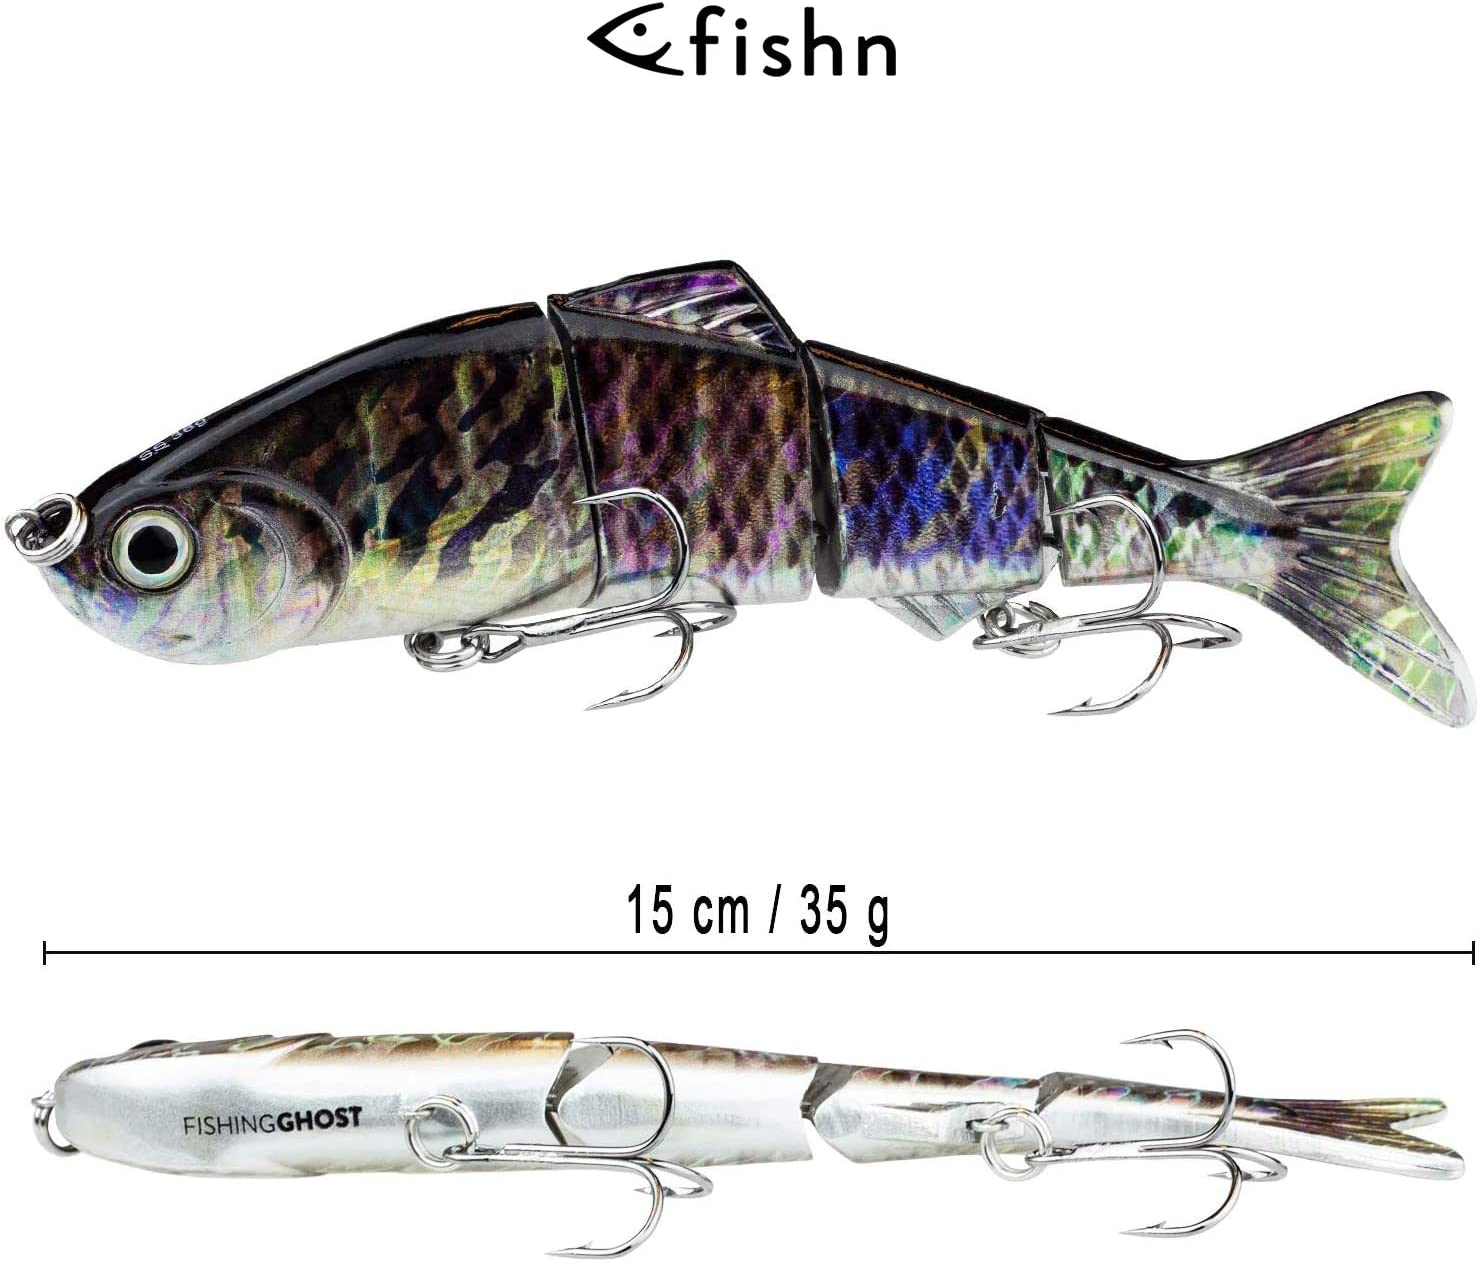 FISHN Bait Candy Set, Length: 12 cm/15 cm, Weight: 18/35 g, Swimbait Lure / Fishing Lure / Wobbler for Fishing Predatory Fish such as Pike, Perch, Trout (4X)